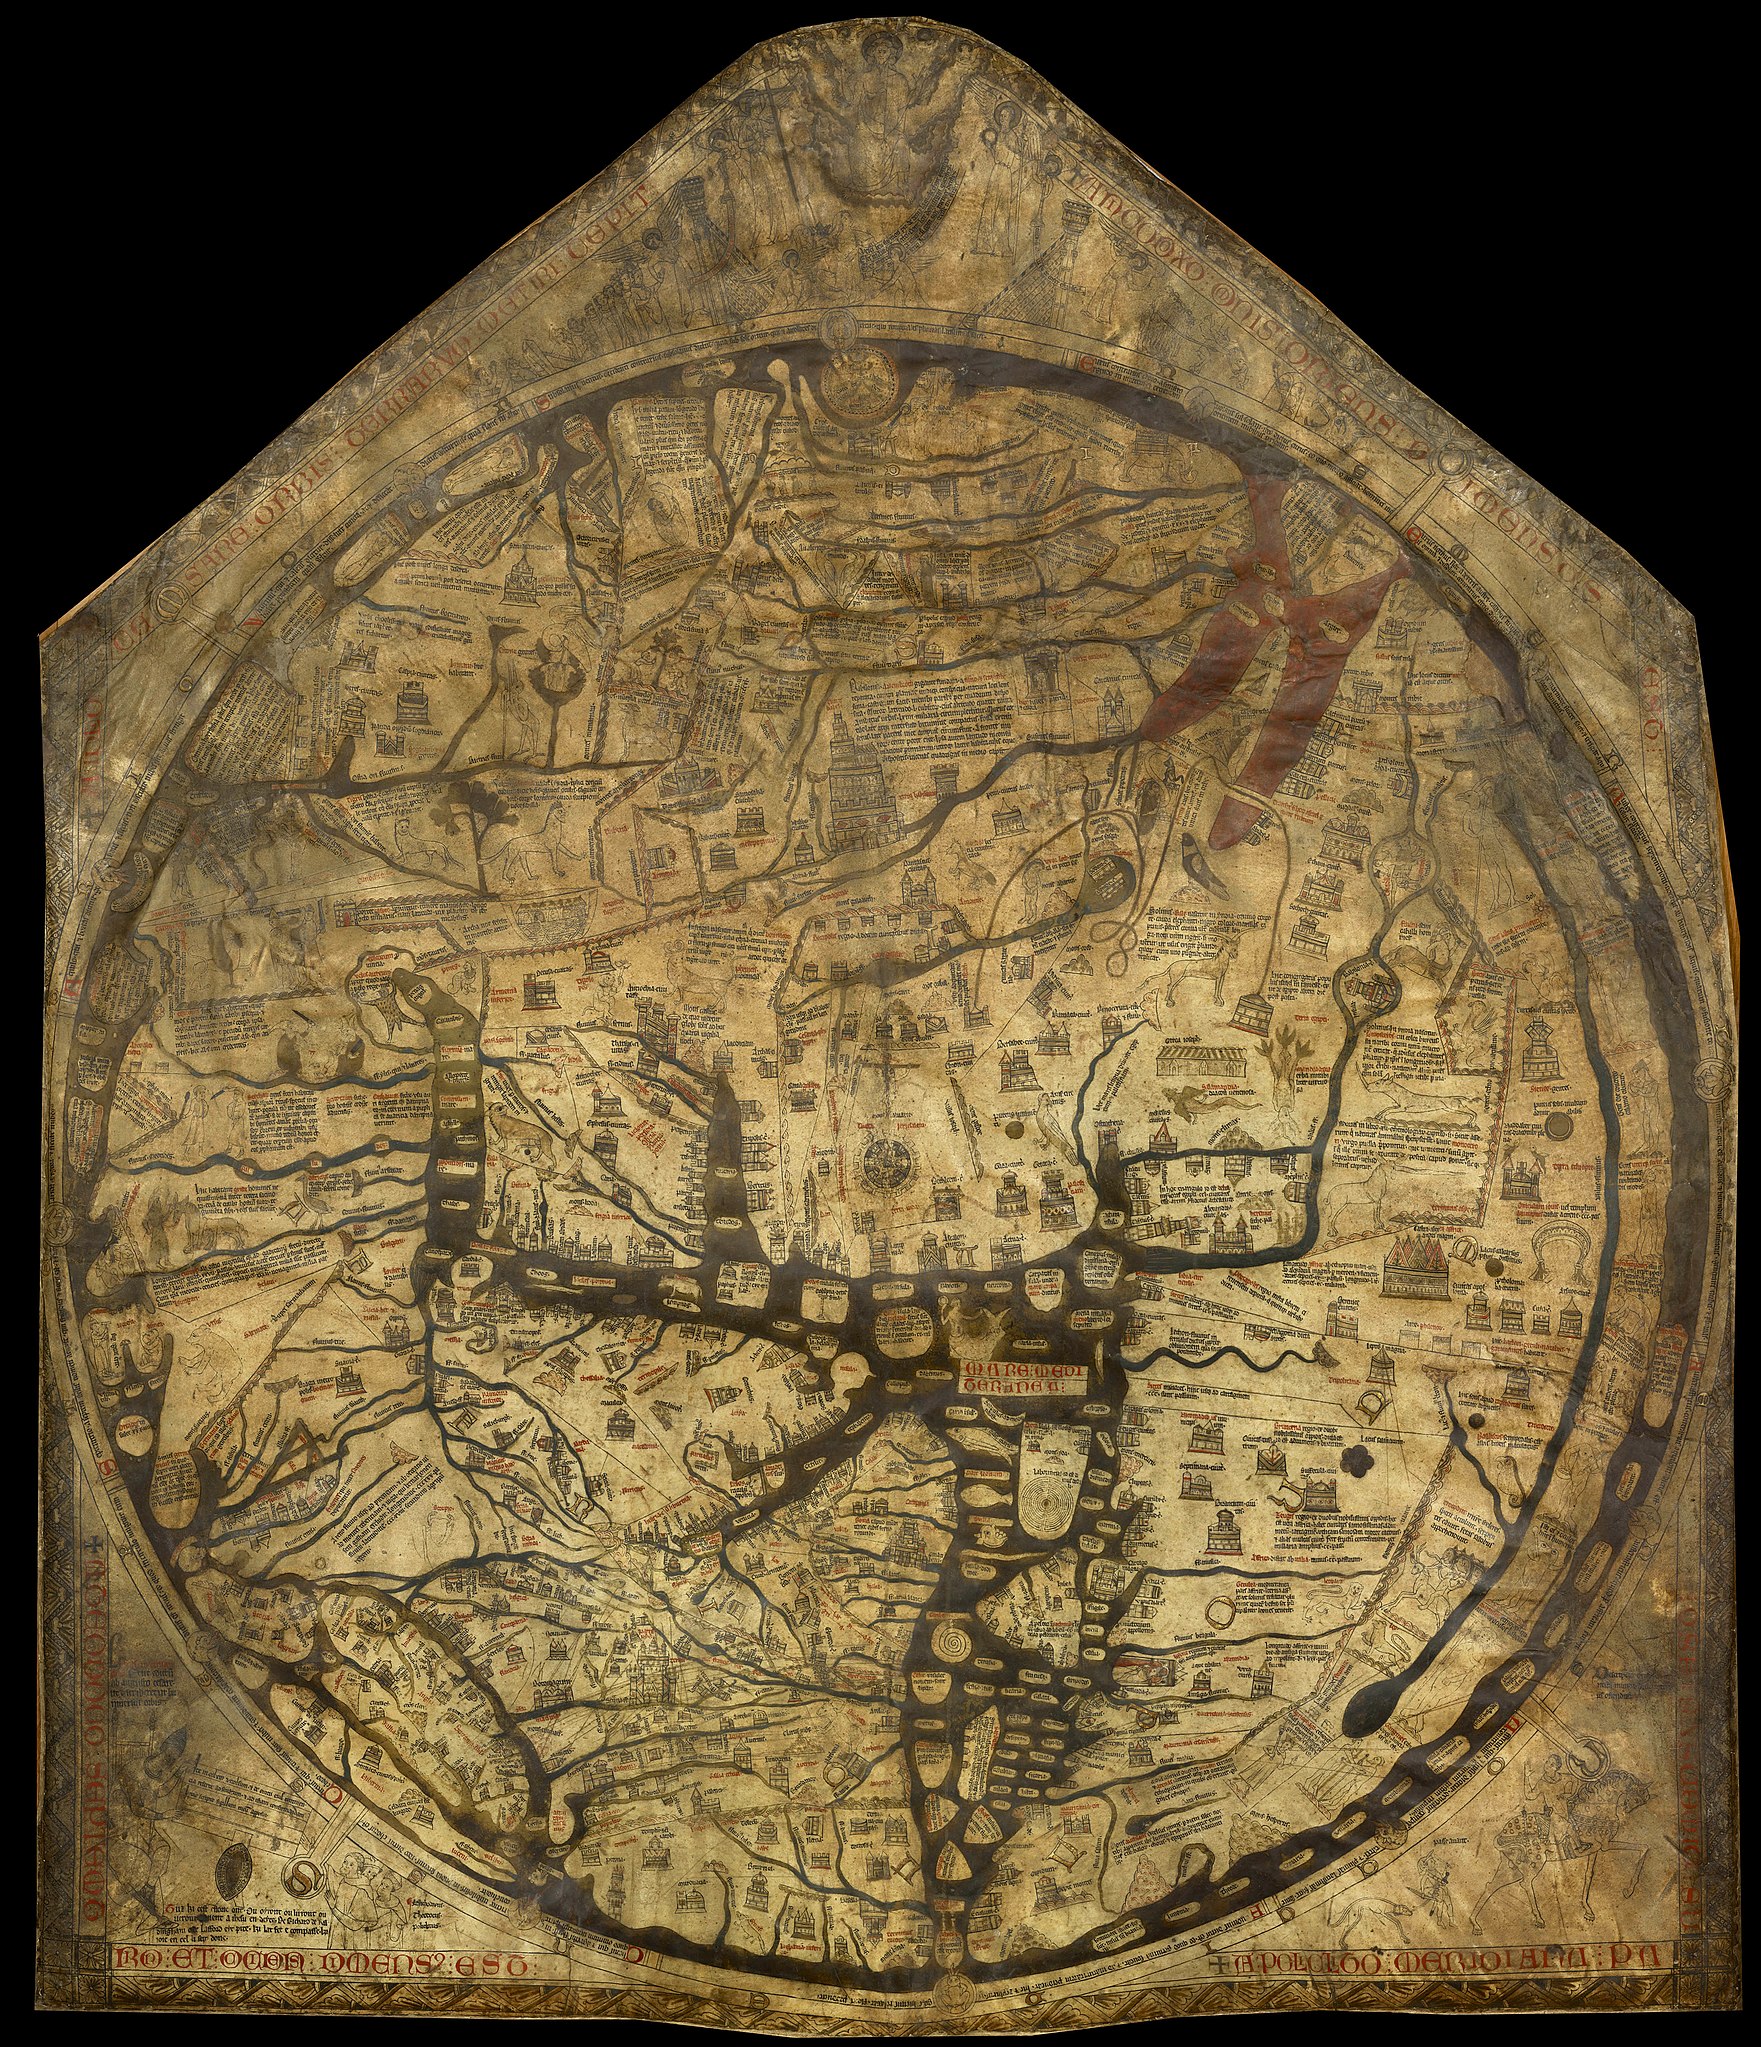 Explore the Hereford Mappa Mundi, the Largest Medieval Map Still in Existence (Circa 1300)